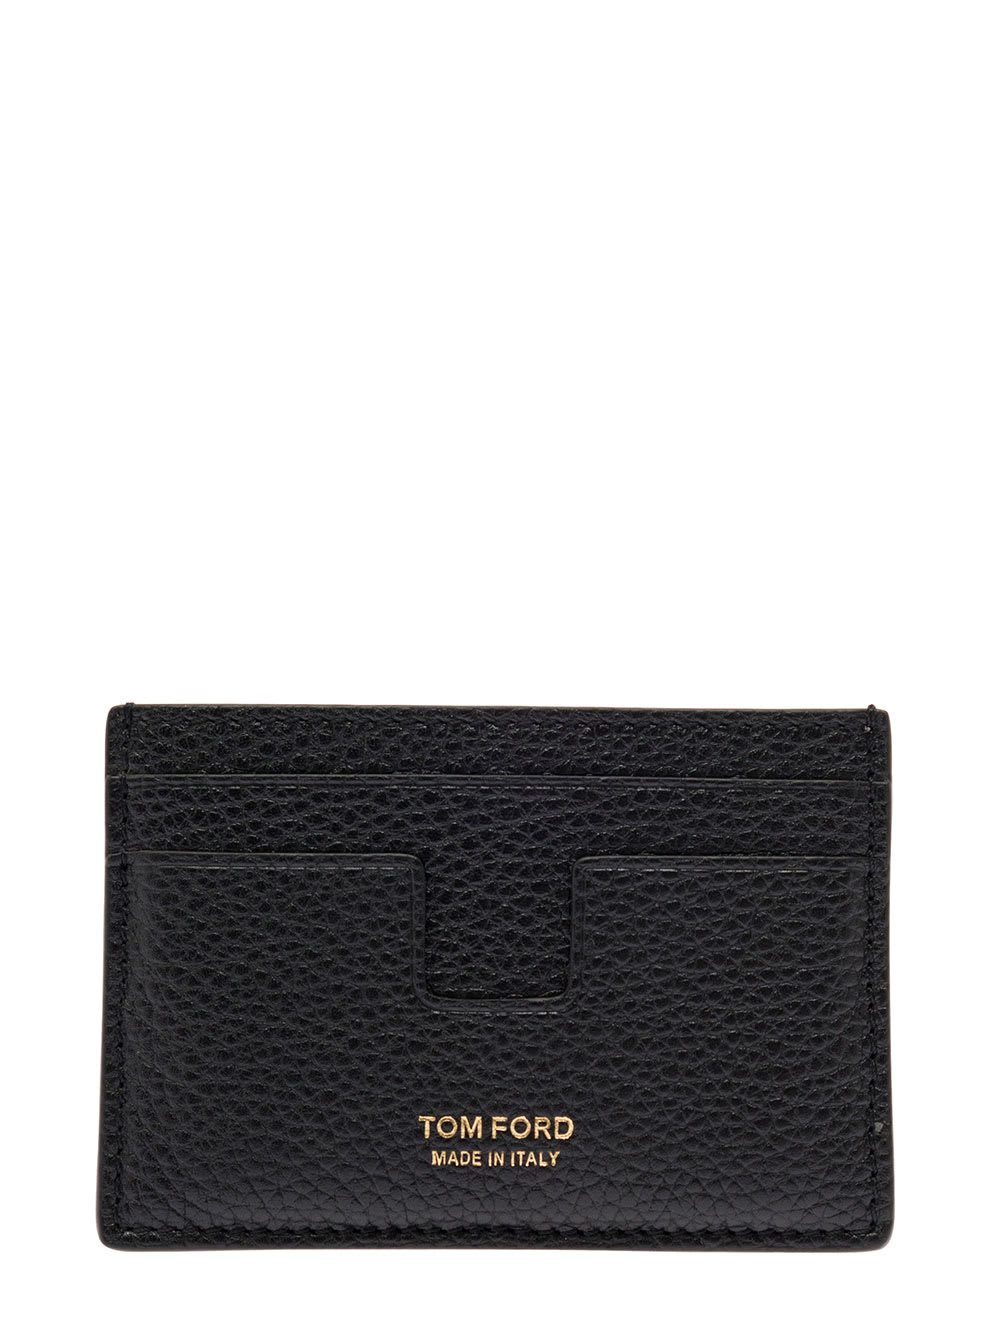 TOM FORD BLACK T LINE CARD-HOLDER WITH GOLD-COLORED EMBOSSED LOGO IN GRAINY LEATHER MAN